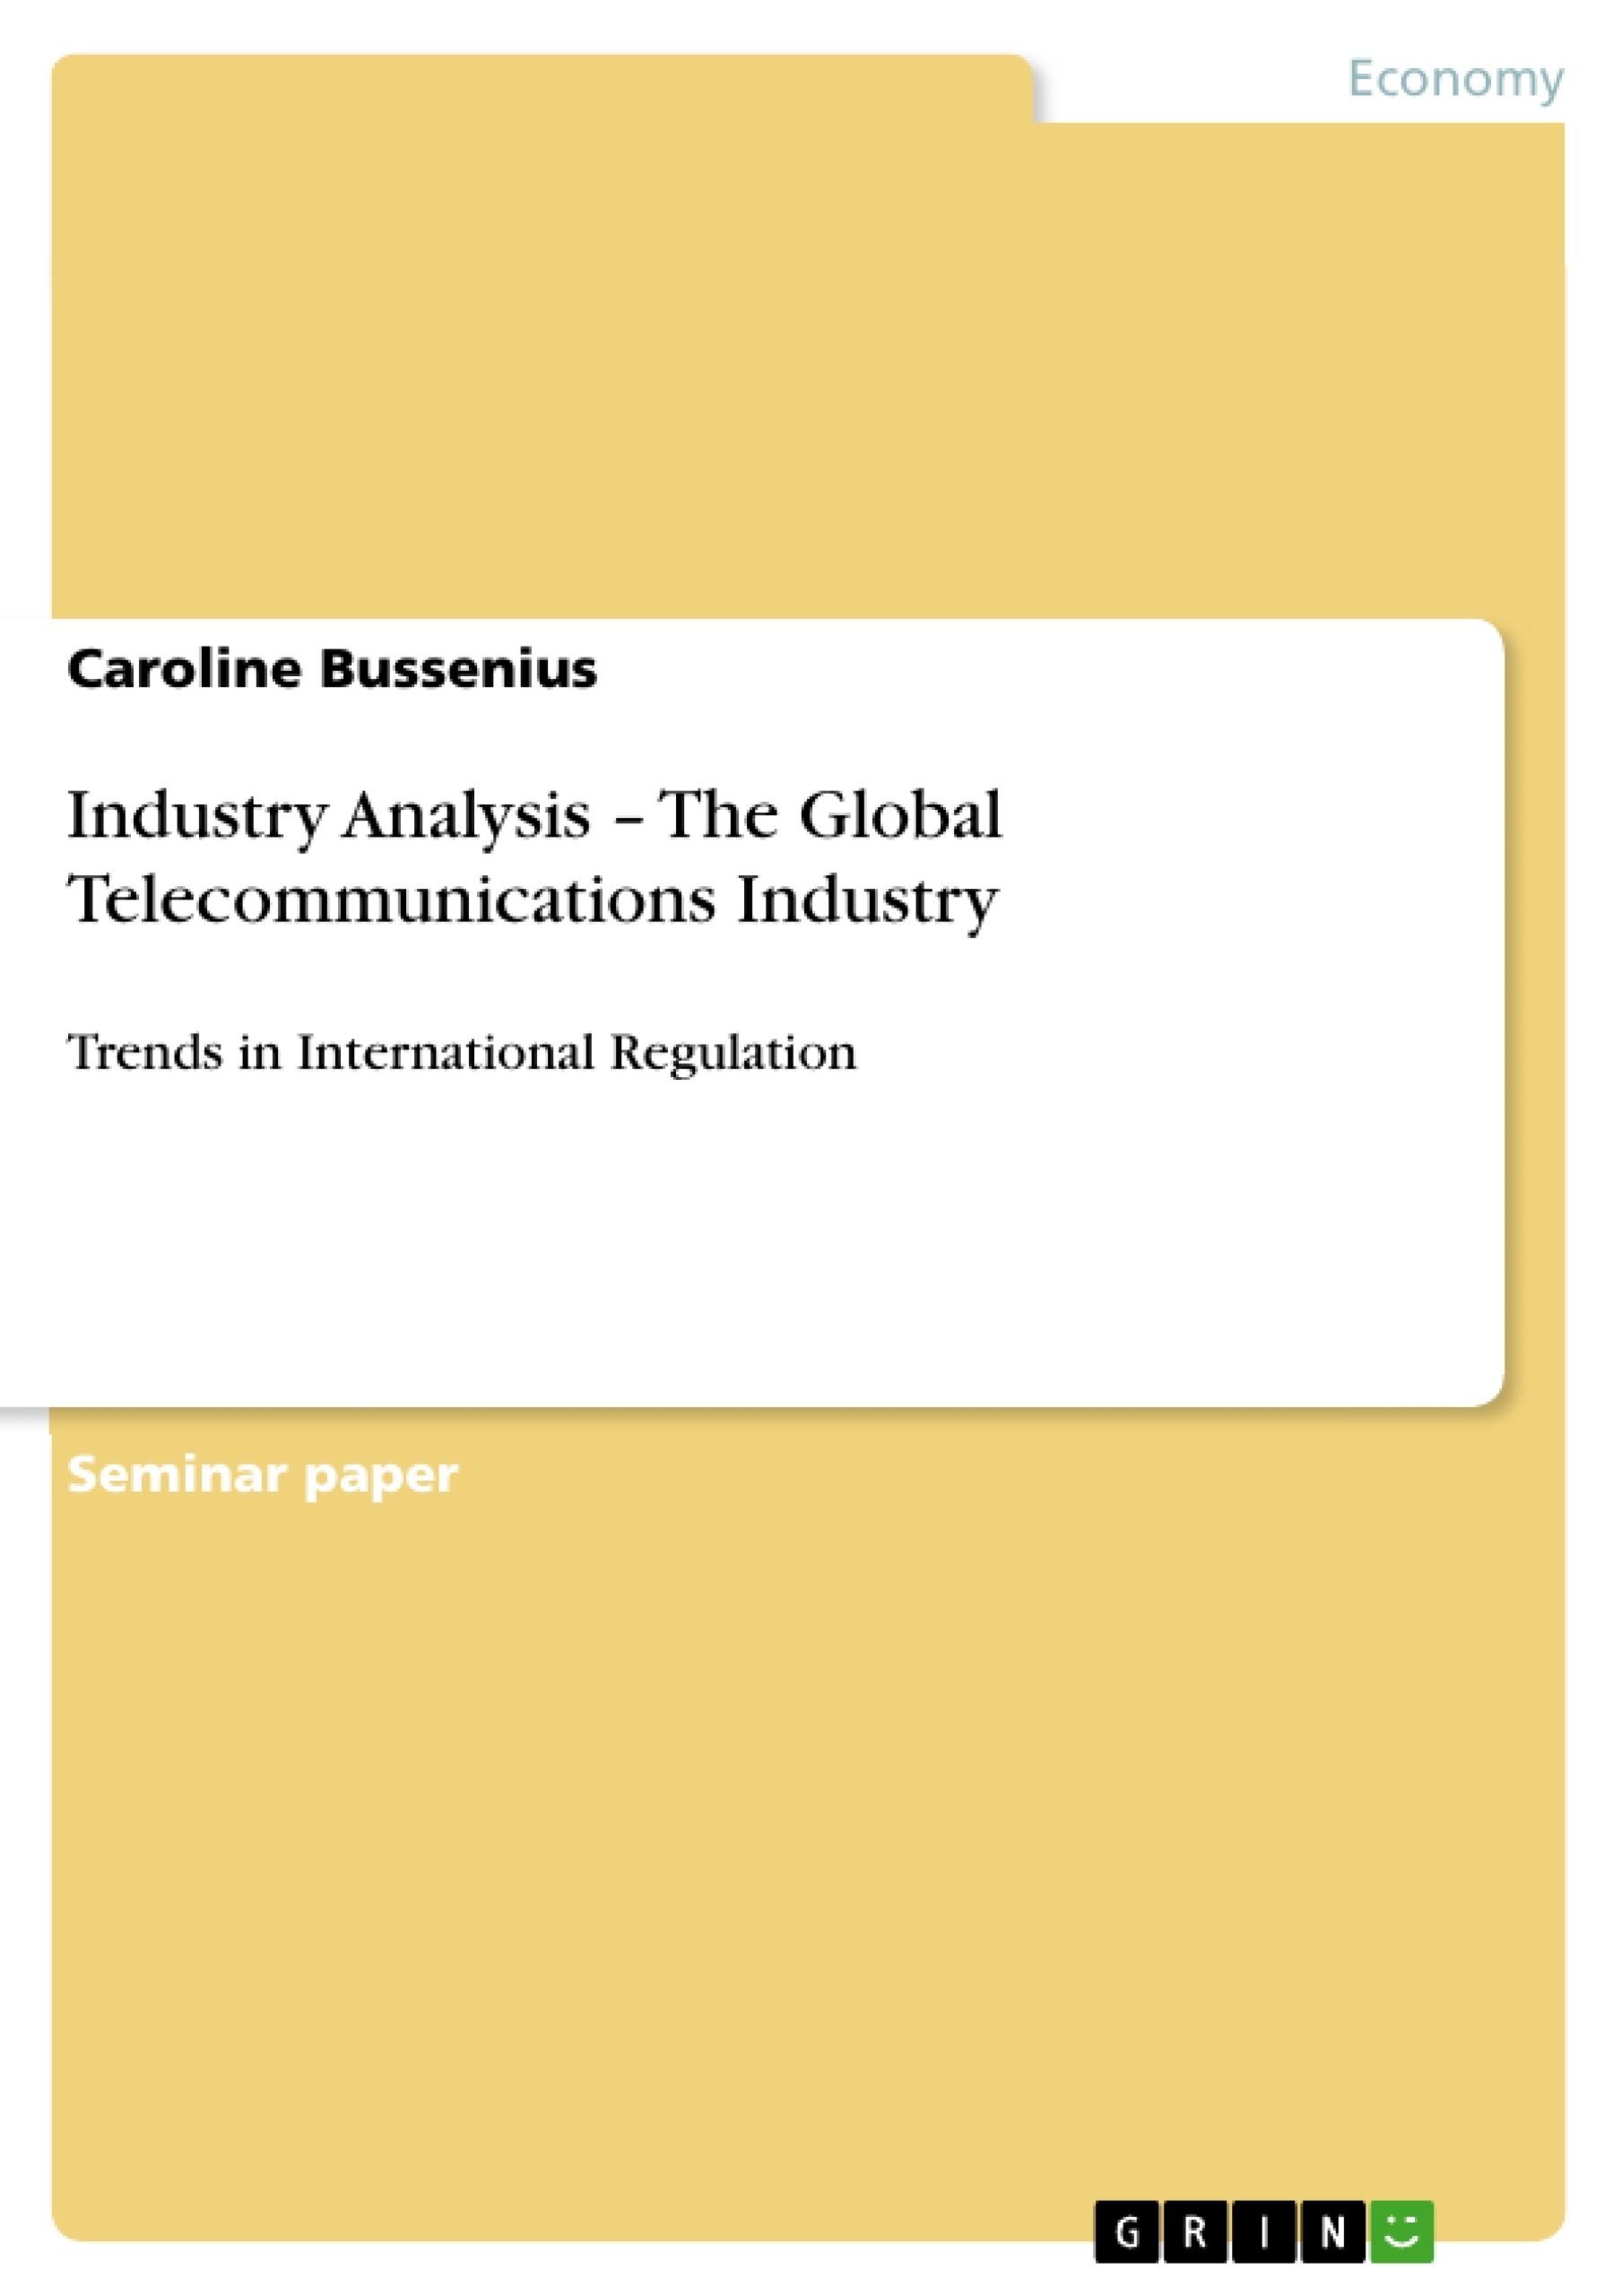 Master thesis telecommunications